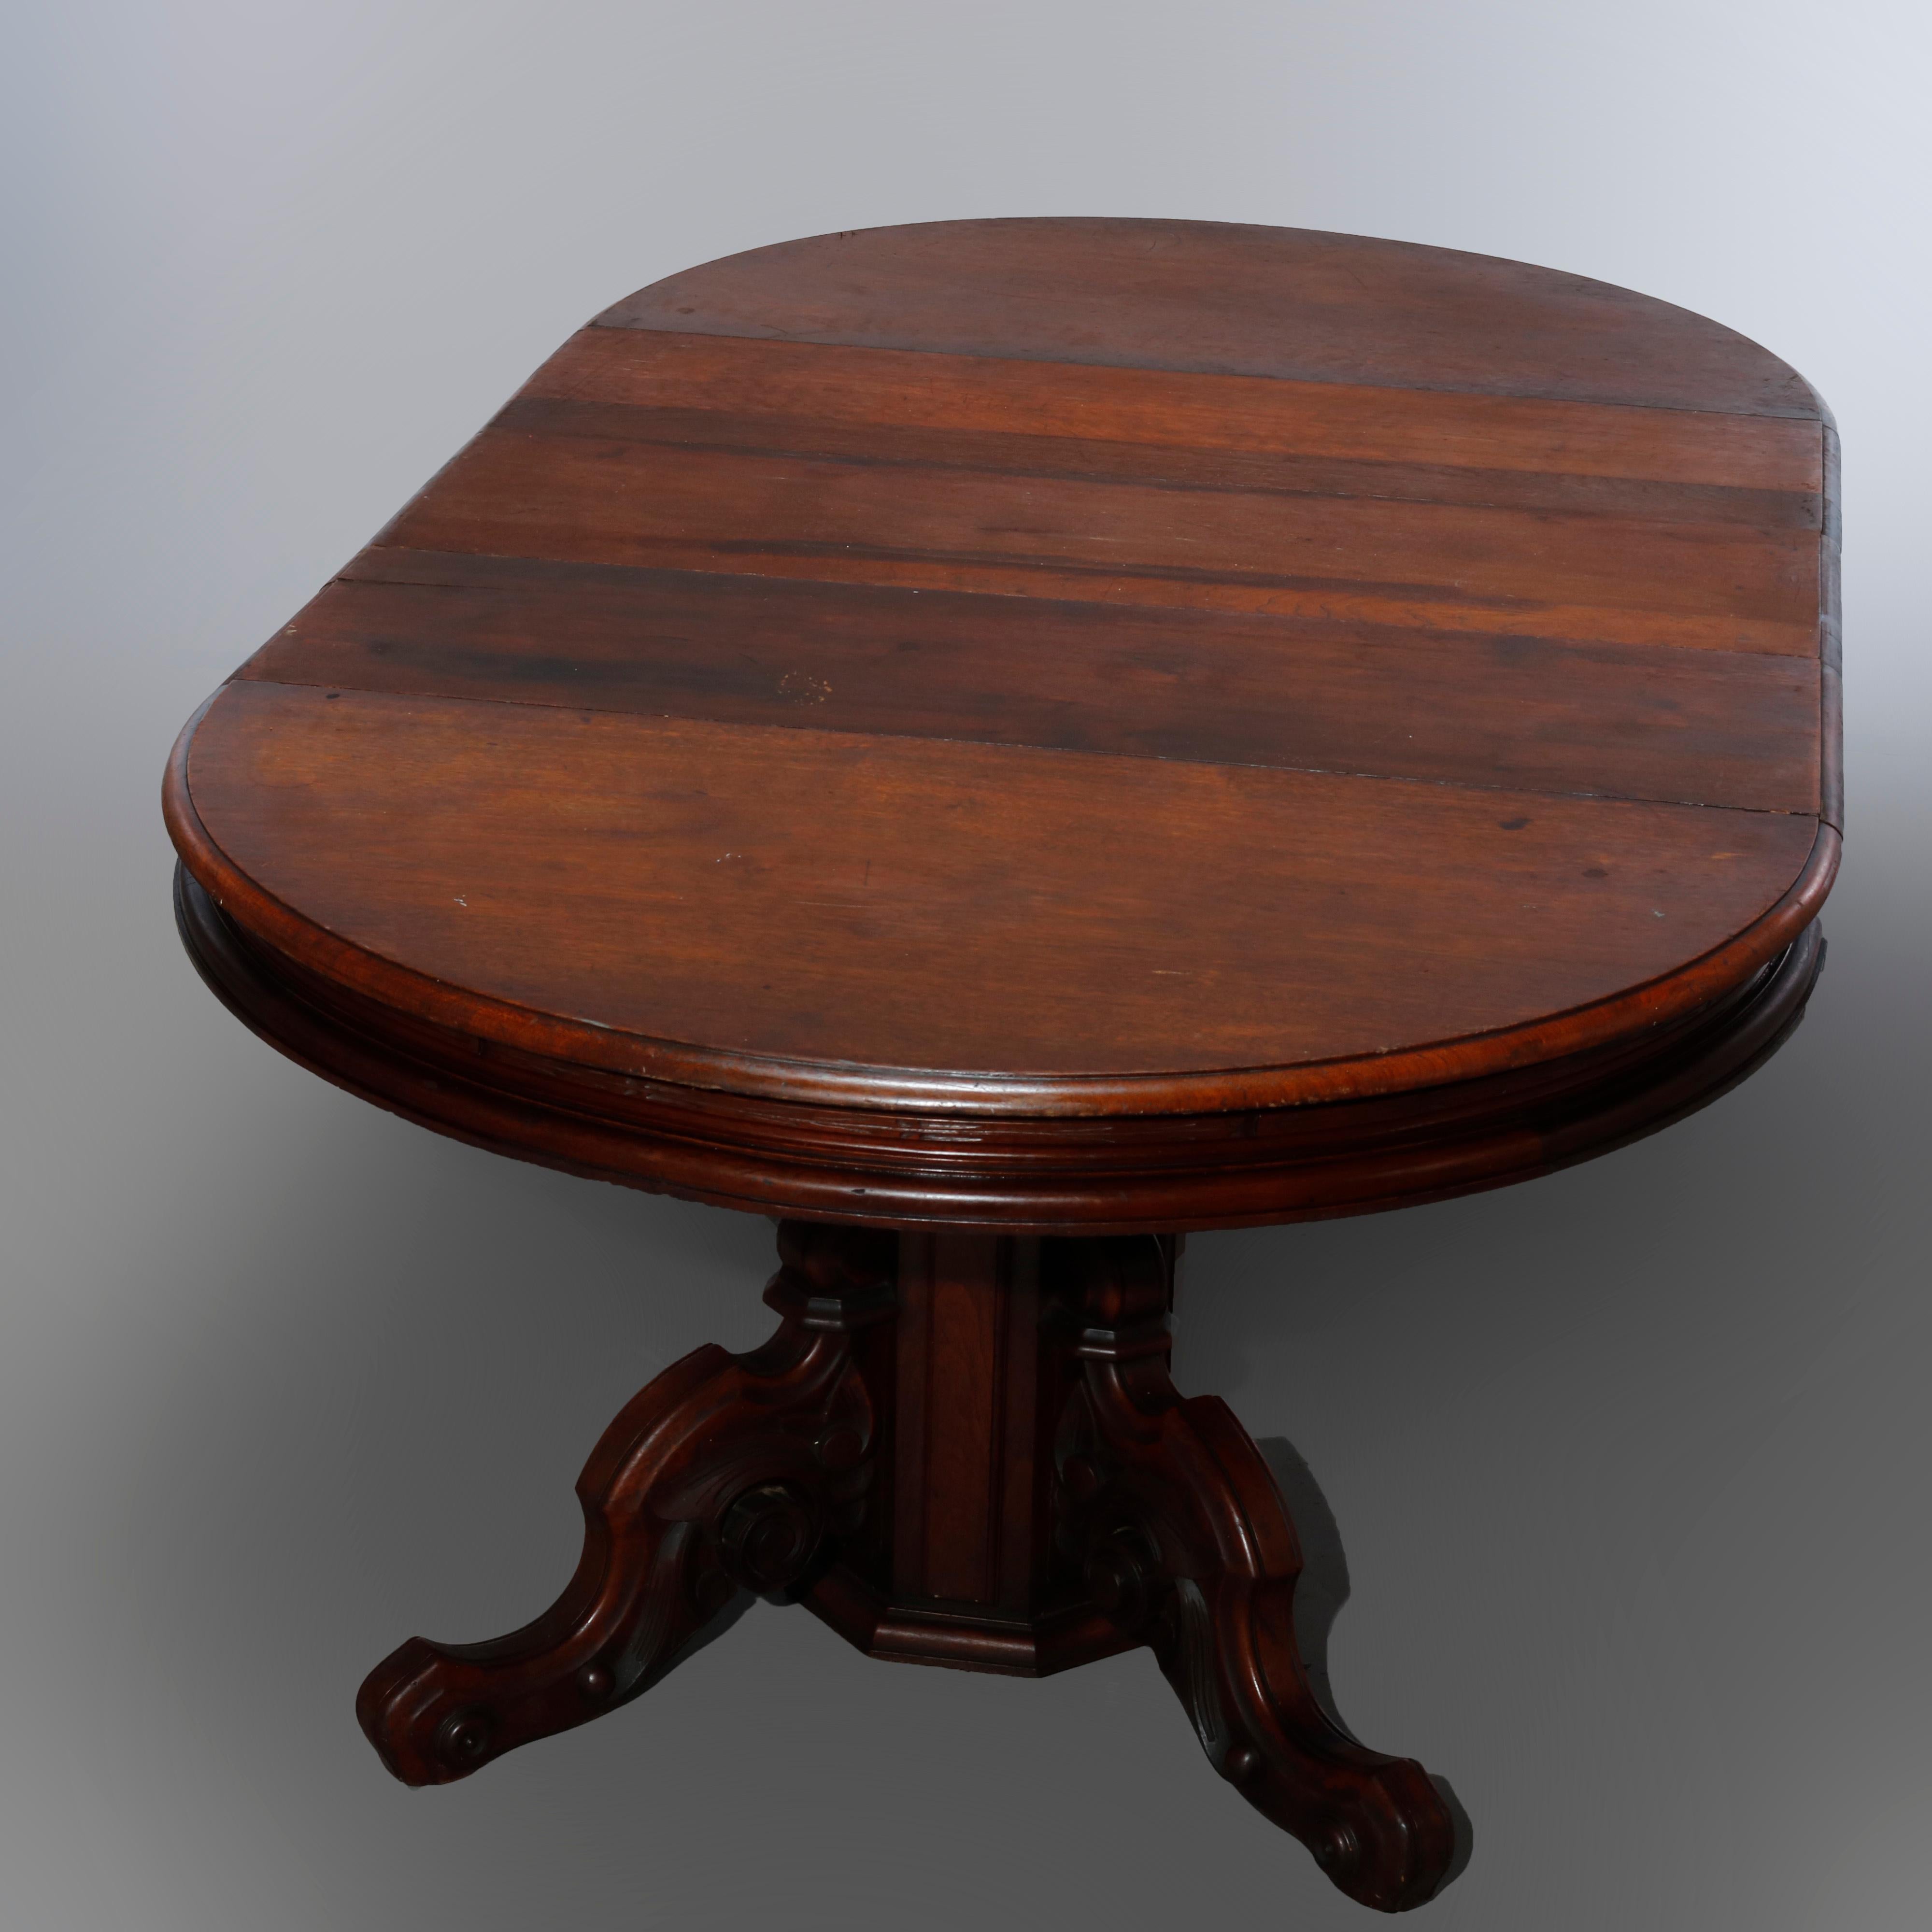 An antique Renaissance Revival extension dining table offers walnut construction with round top over split pedestal base raised on four carved legs having scroll feet, extends and accepts two leaves, c1880

Measures: 28.25